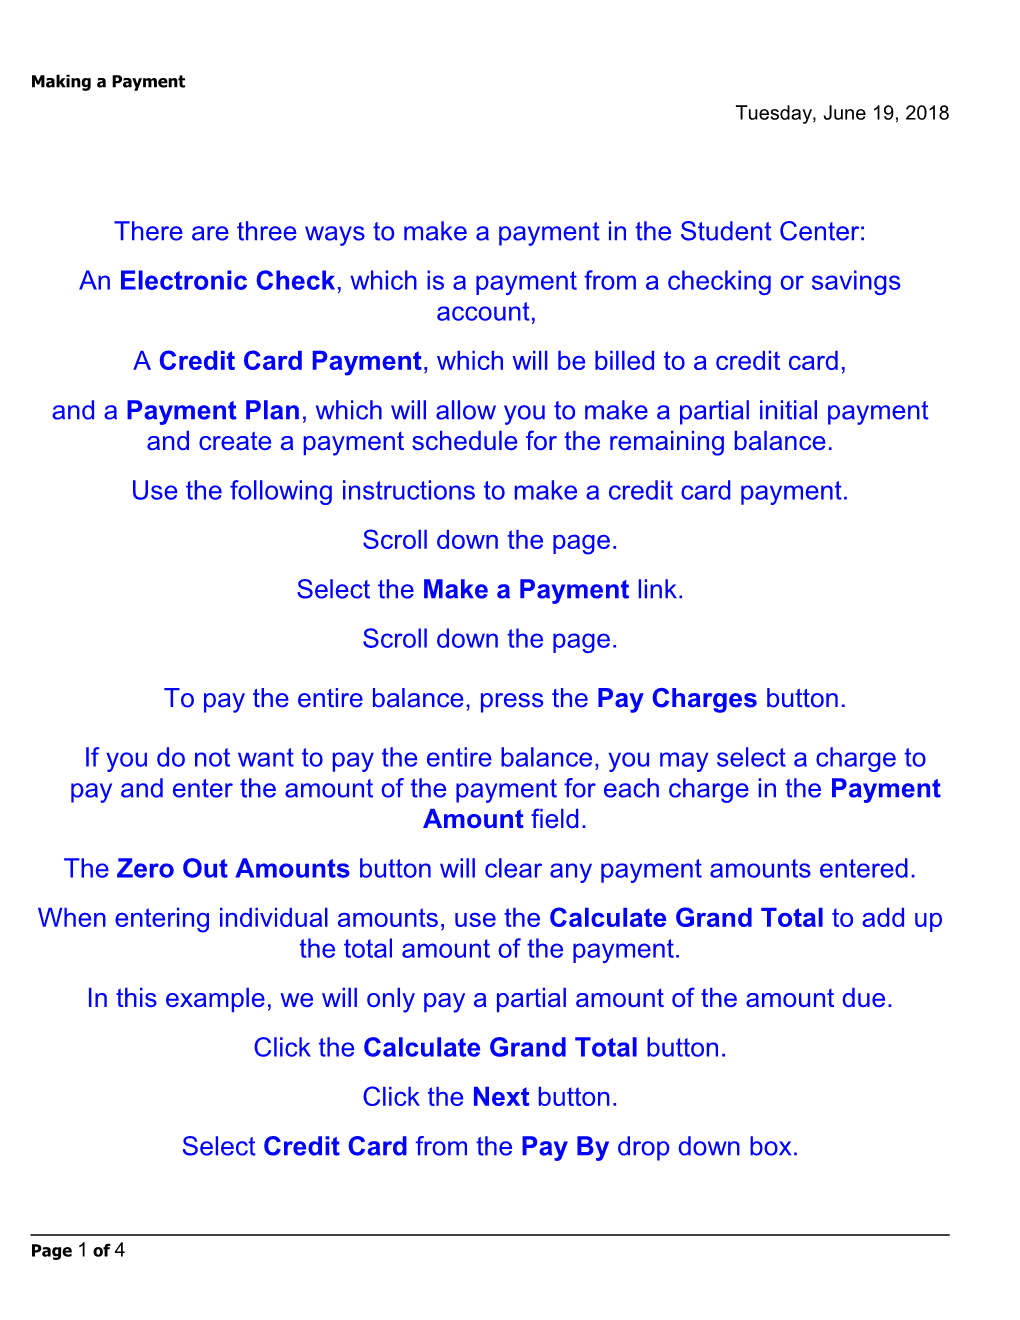 There Are Three Ways to Make a Payment in the Student Center